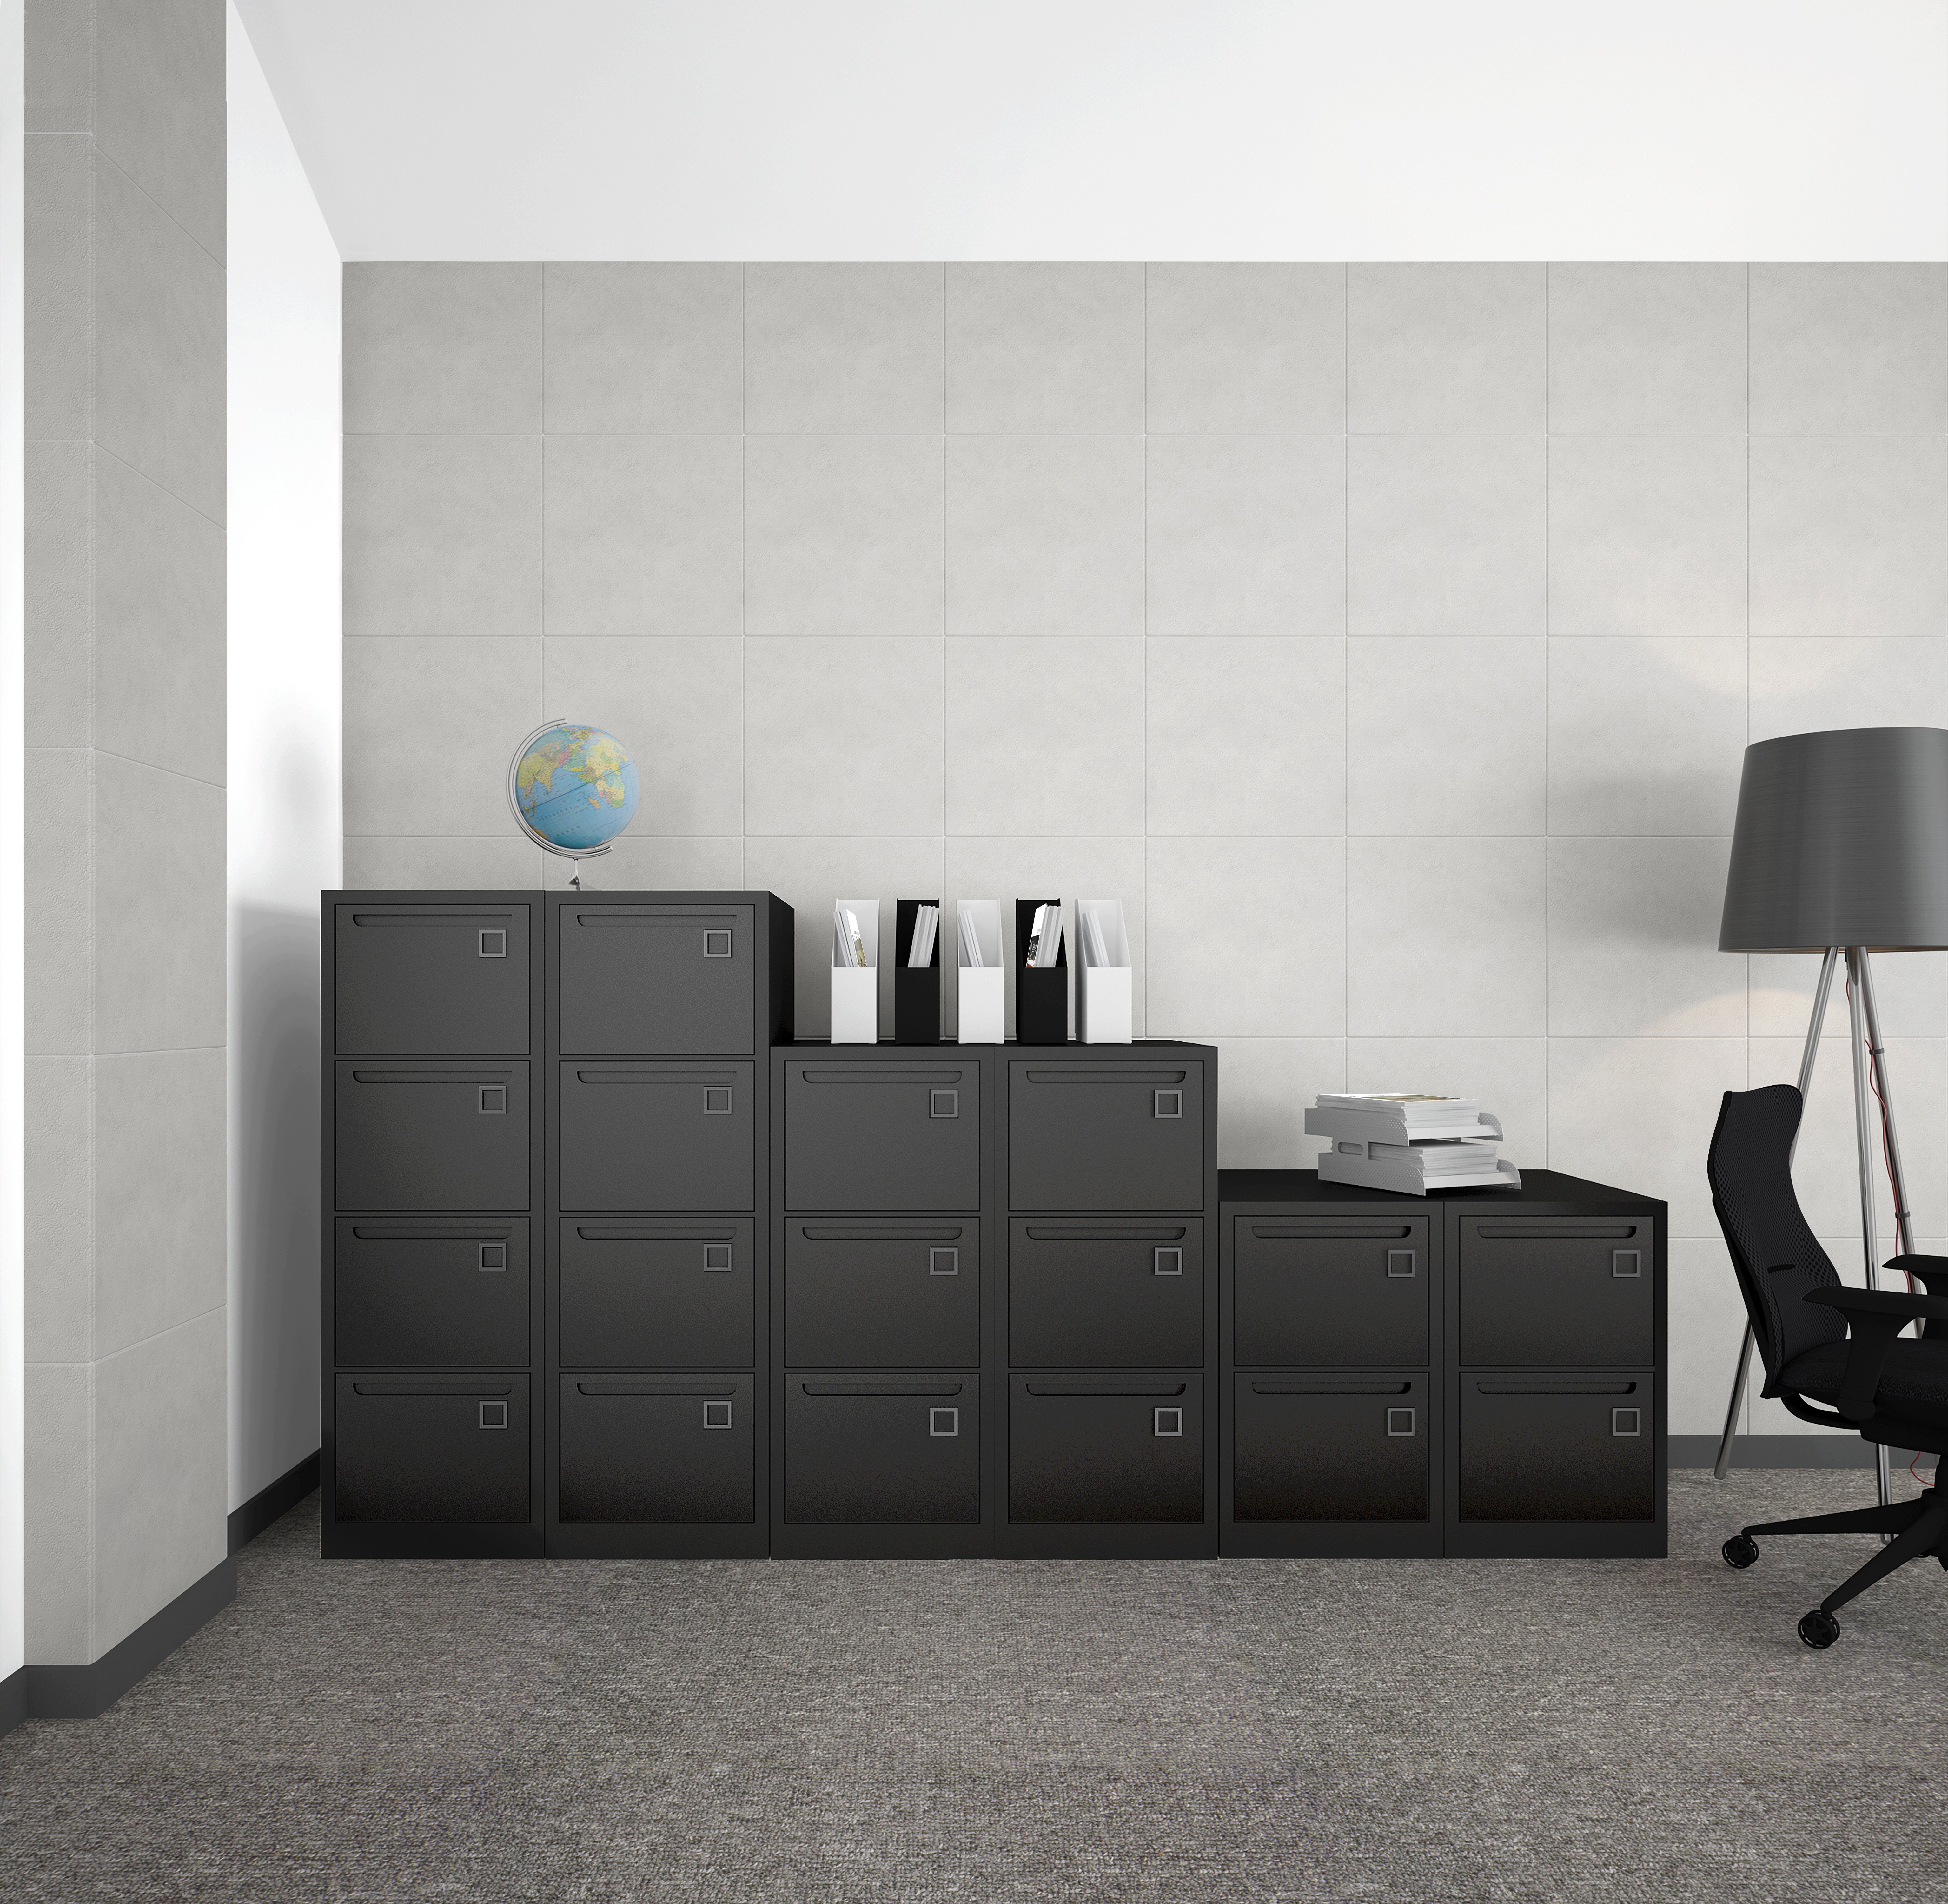 filling-office-cabinet